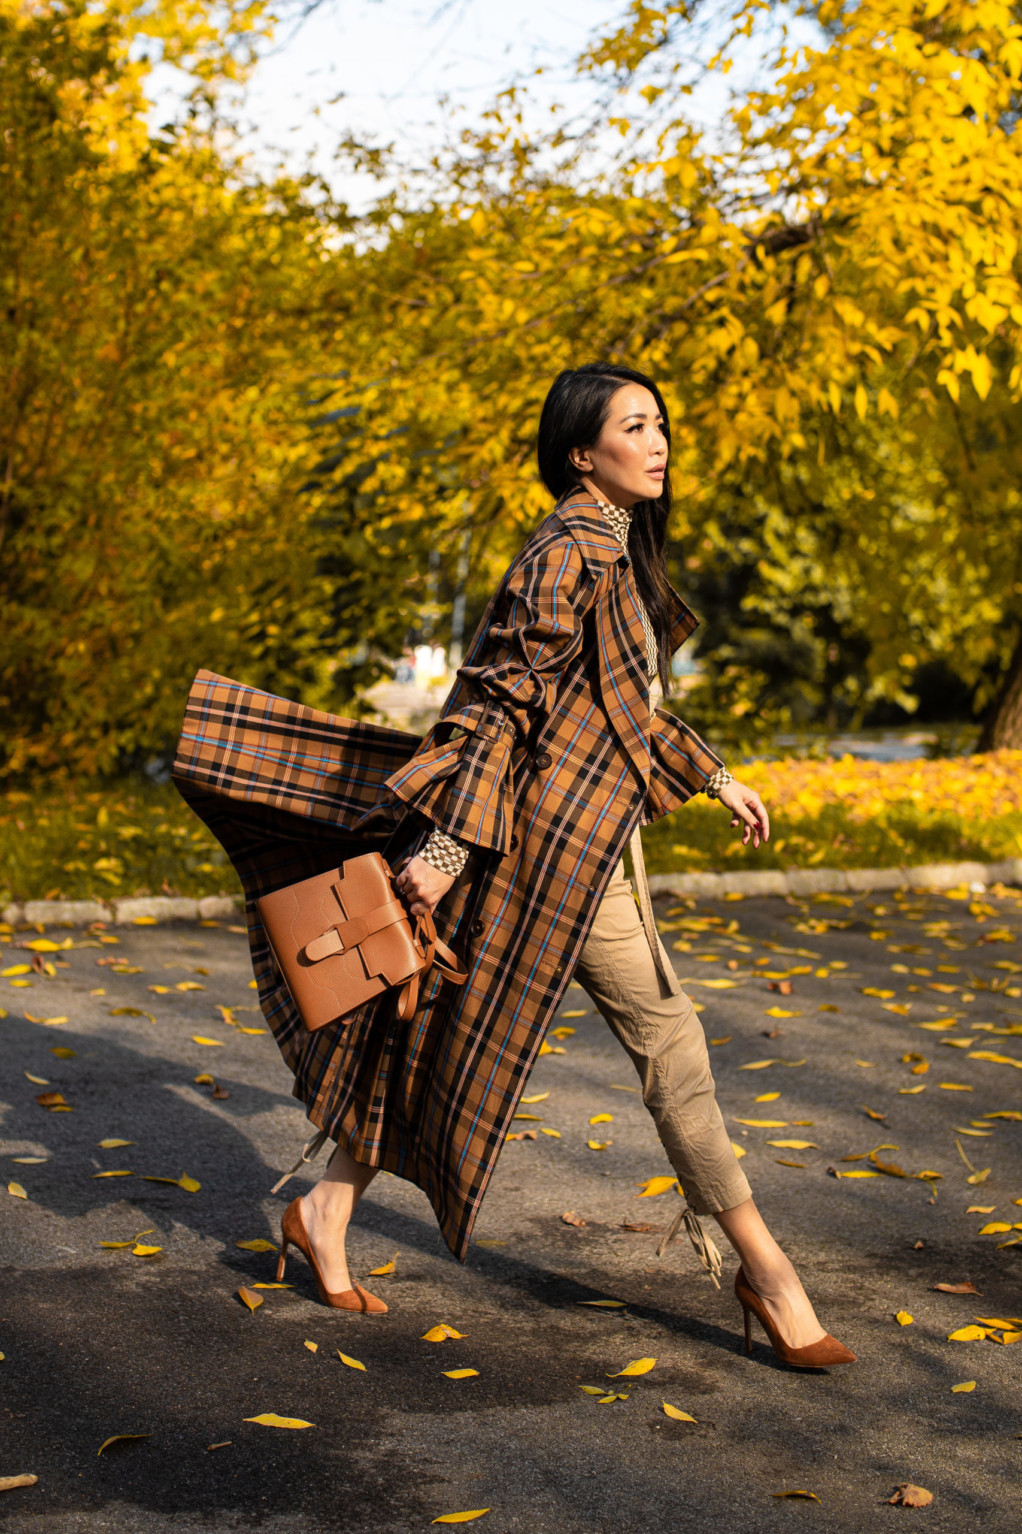 Autumn Looks in Shades of Chestnut and Rose - Wendy's Lookbook